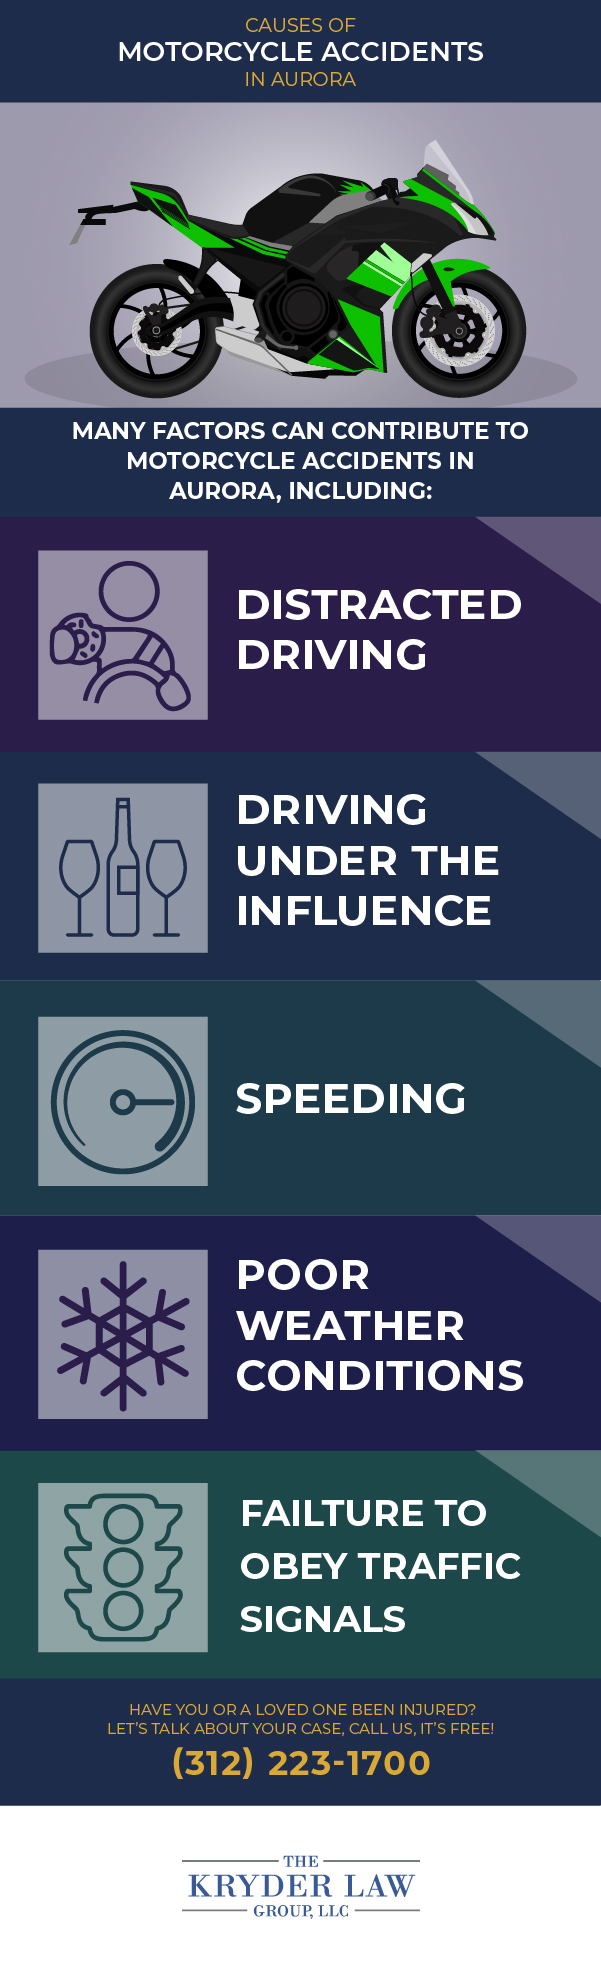 Causes of Motorcycle Accidents in Aurora Infographic